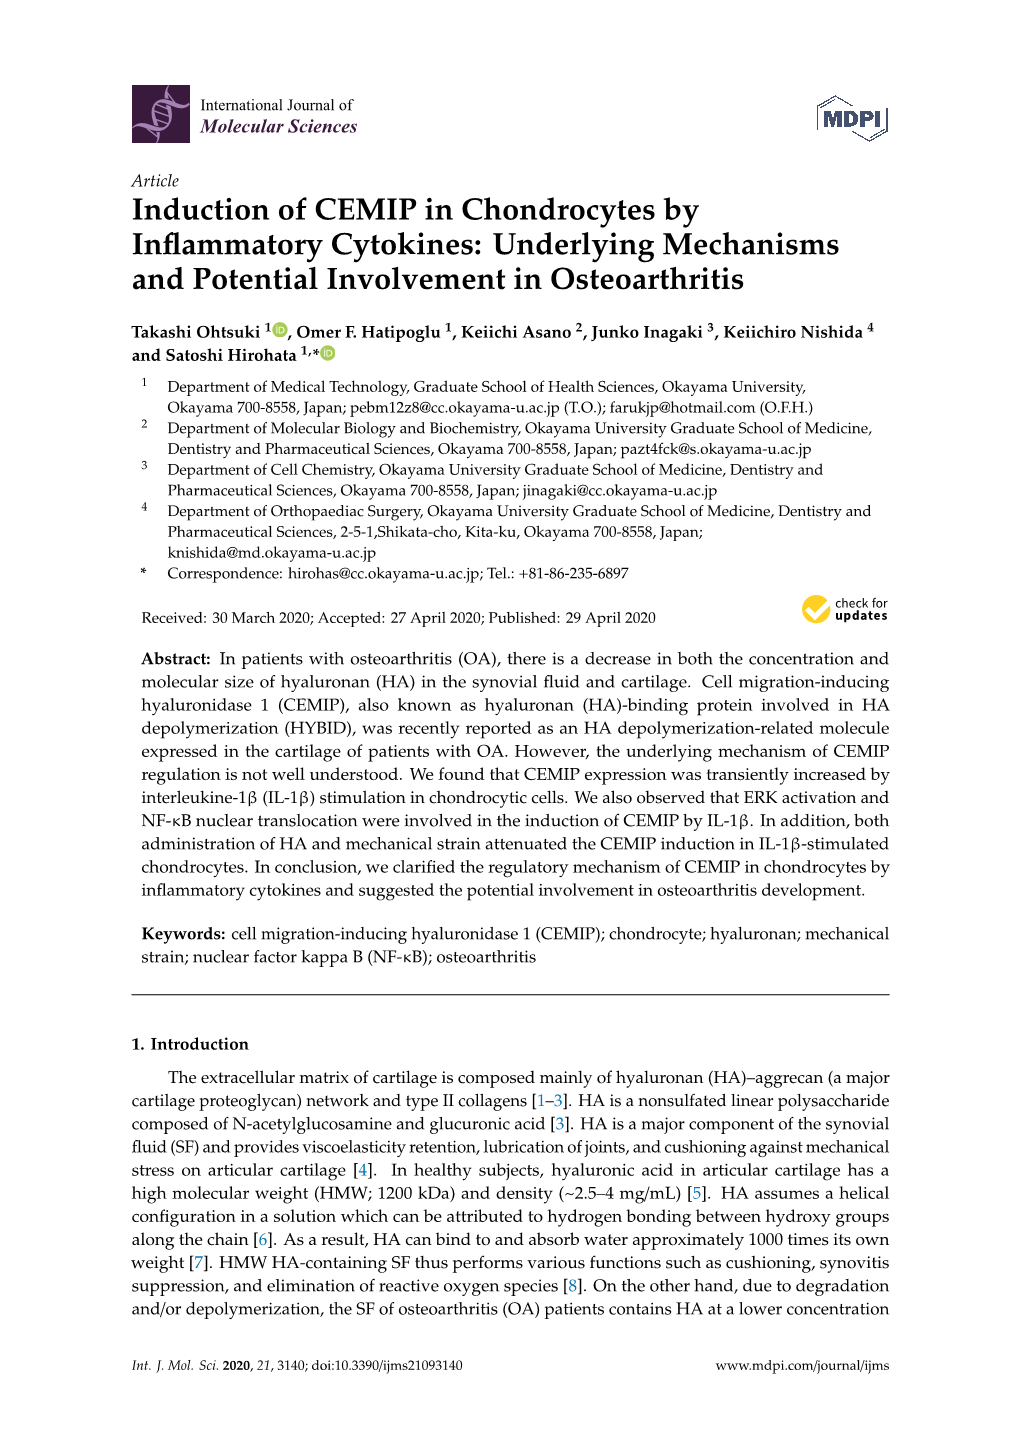 Induction of CEMIP in Chondrocytes by Inflammatory Cytokines: Underlying Mechanisms and Potential Involvement in Osteoarthritis